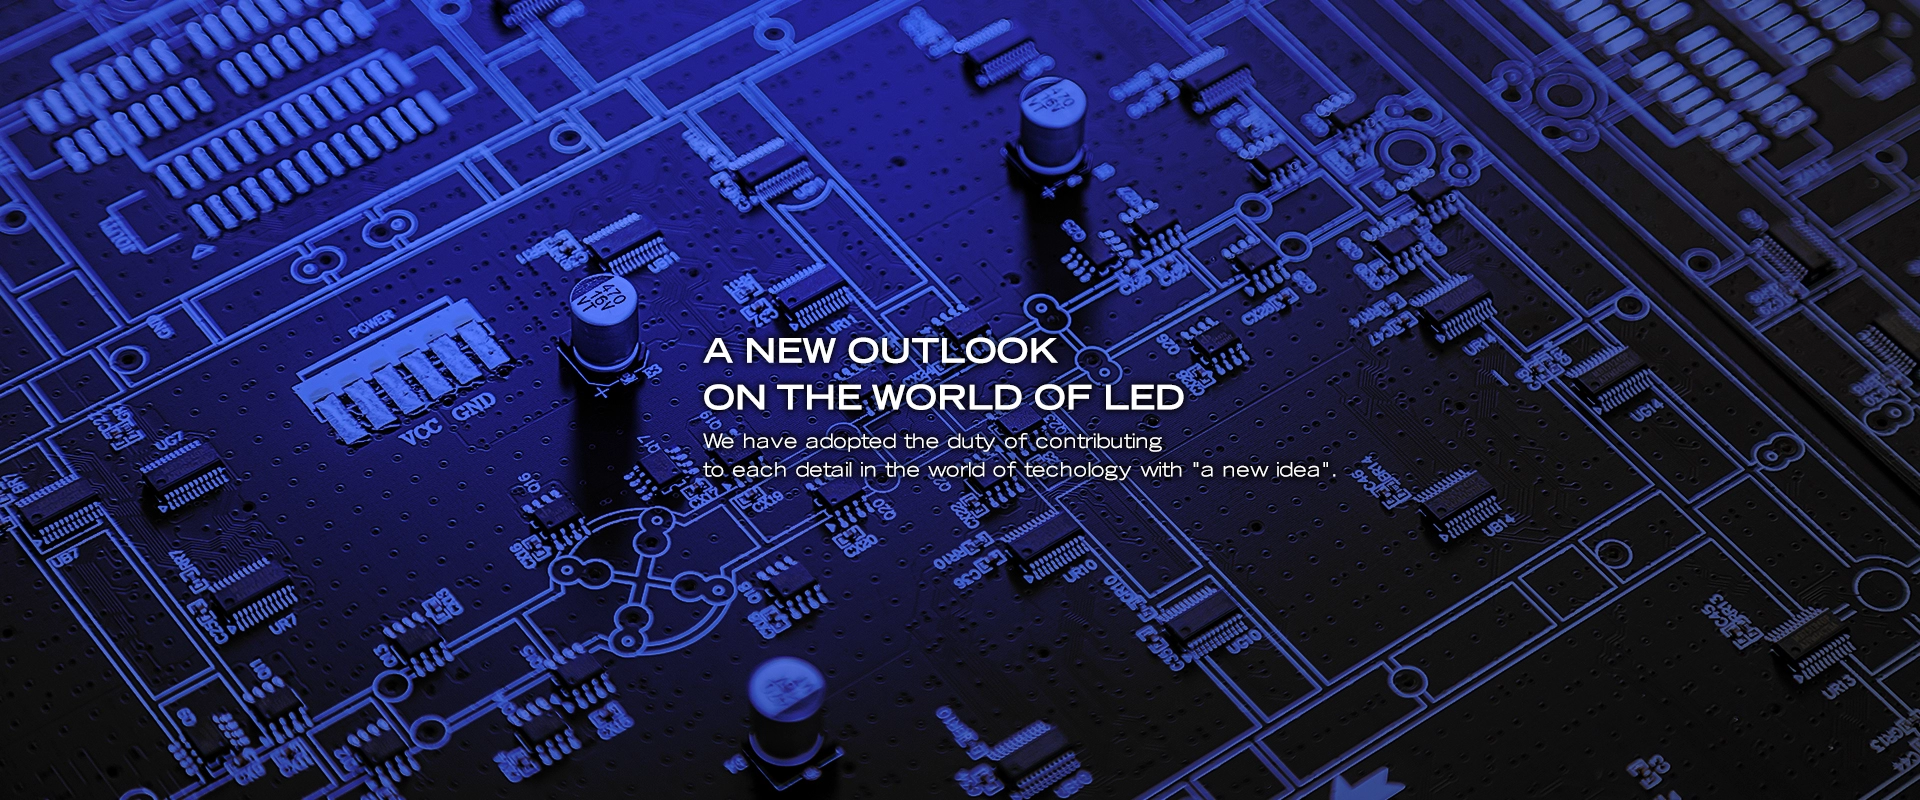 A New Outlook On The World of Led